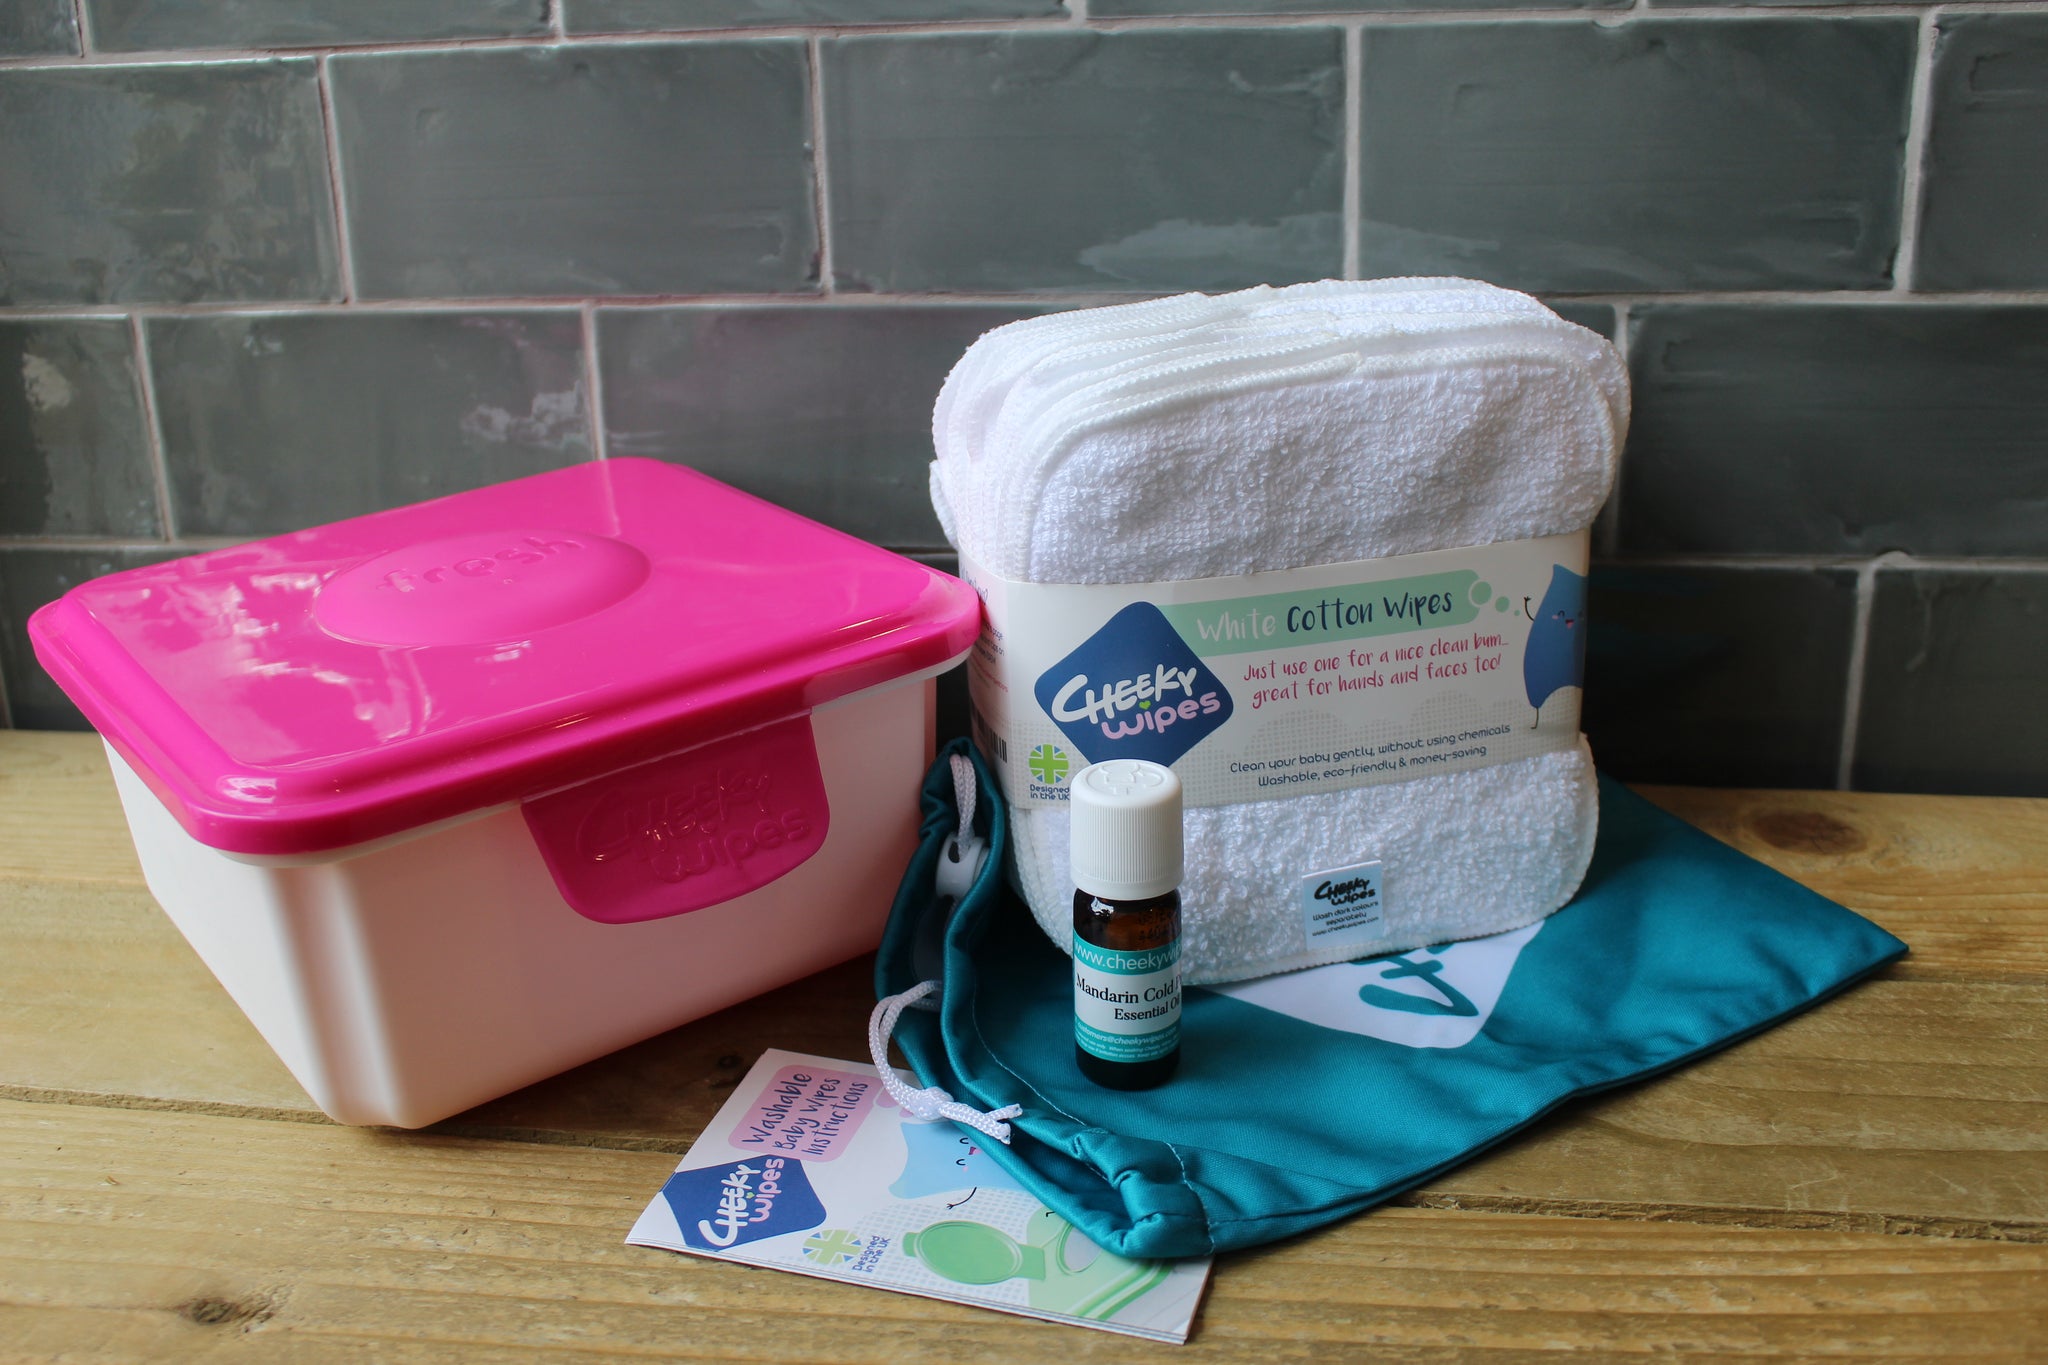 Baby wipe Kit ~ By cheeky wipes – UnSealed, Clacton-on-Sea